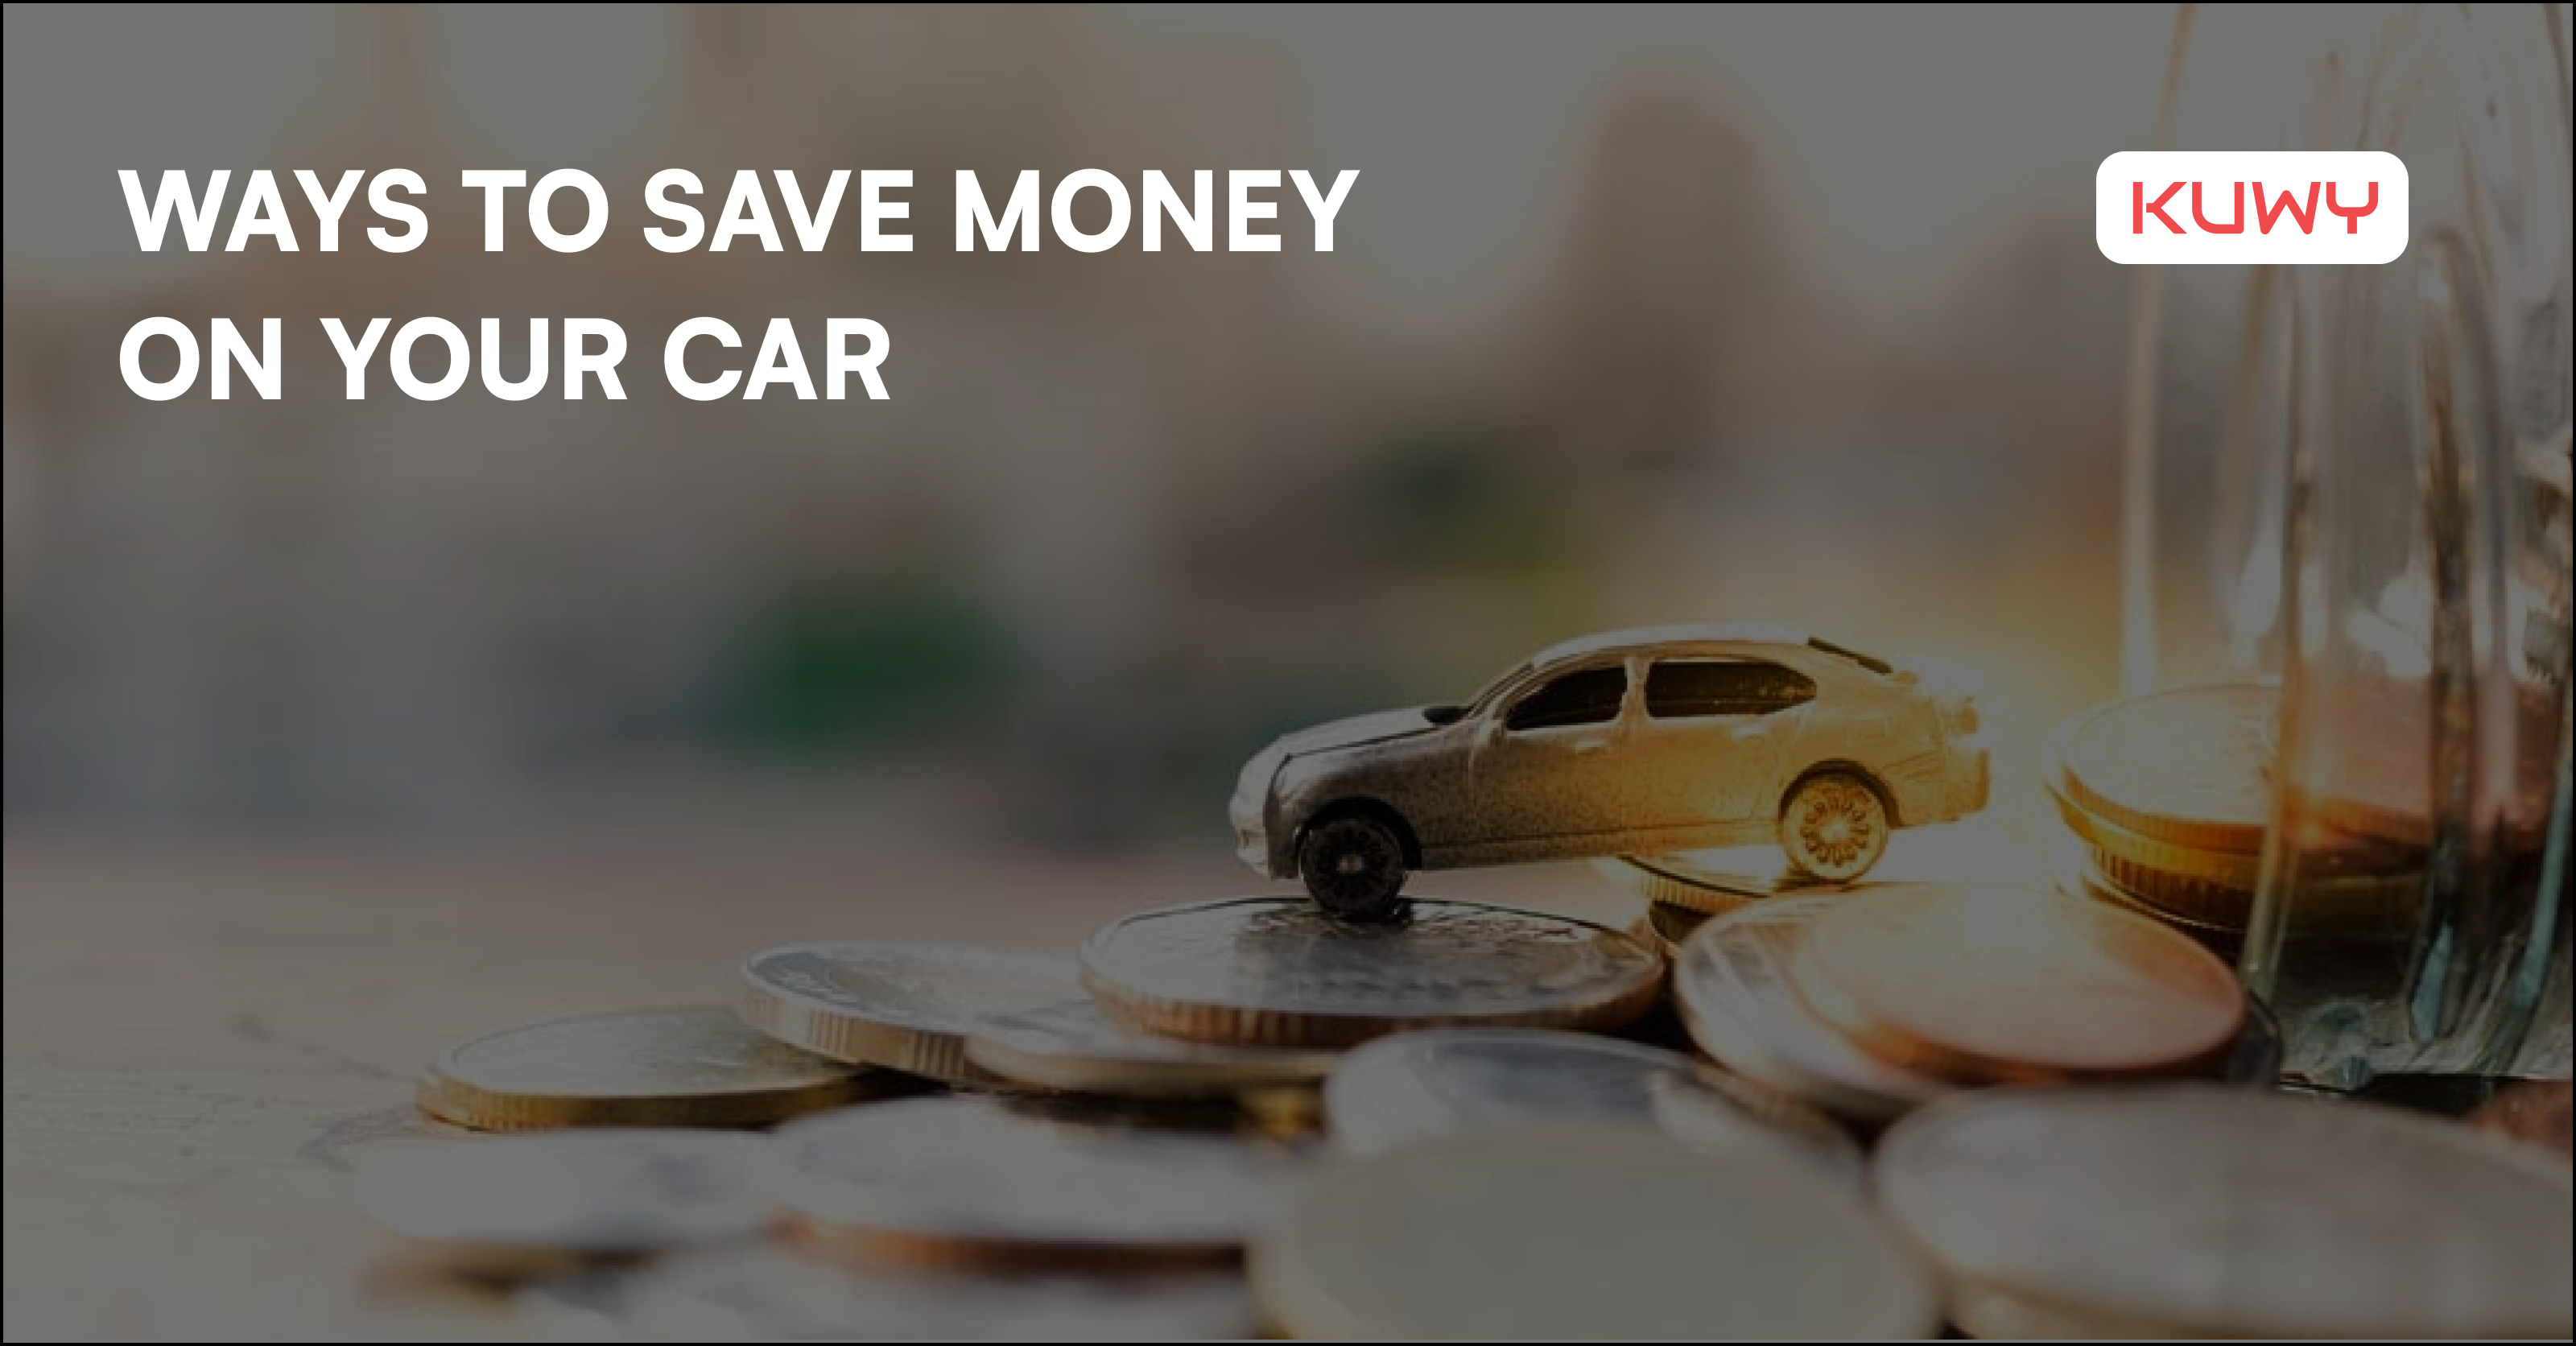 Ways to save money on your car